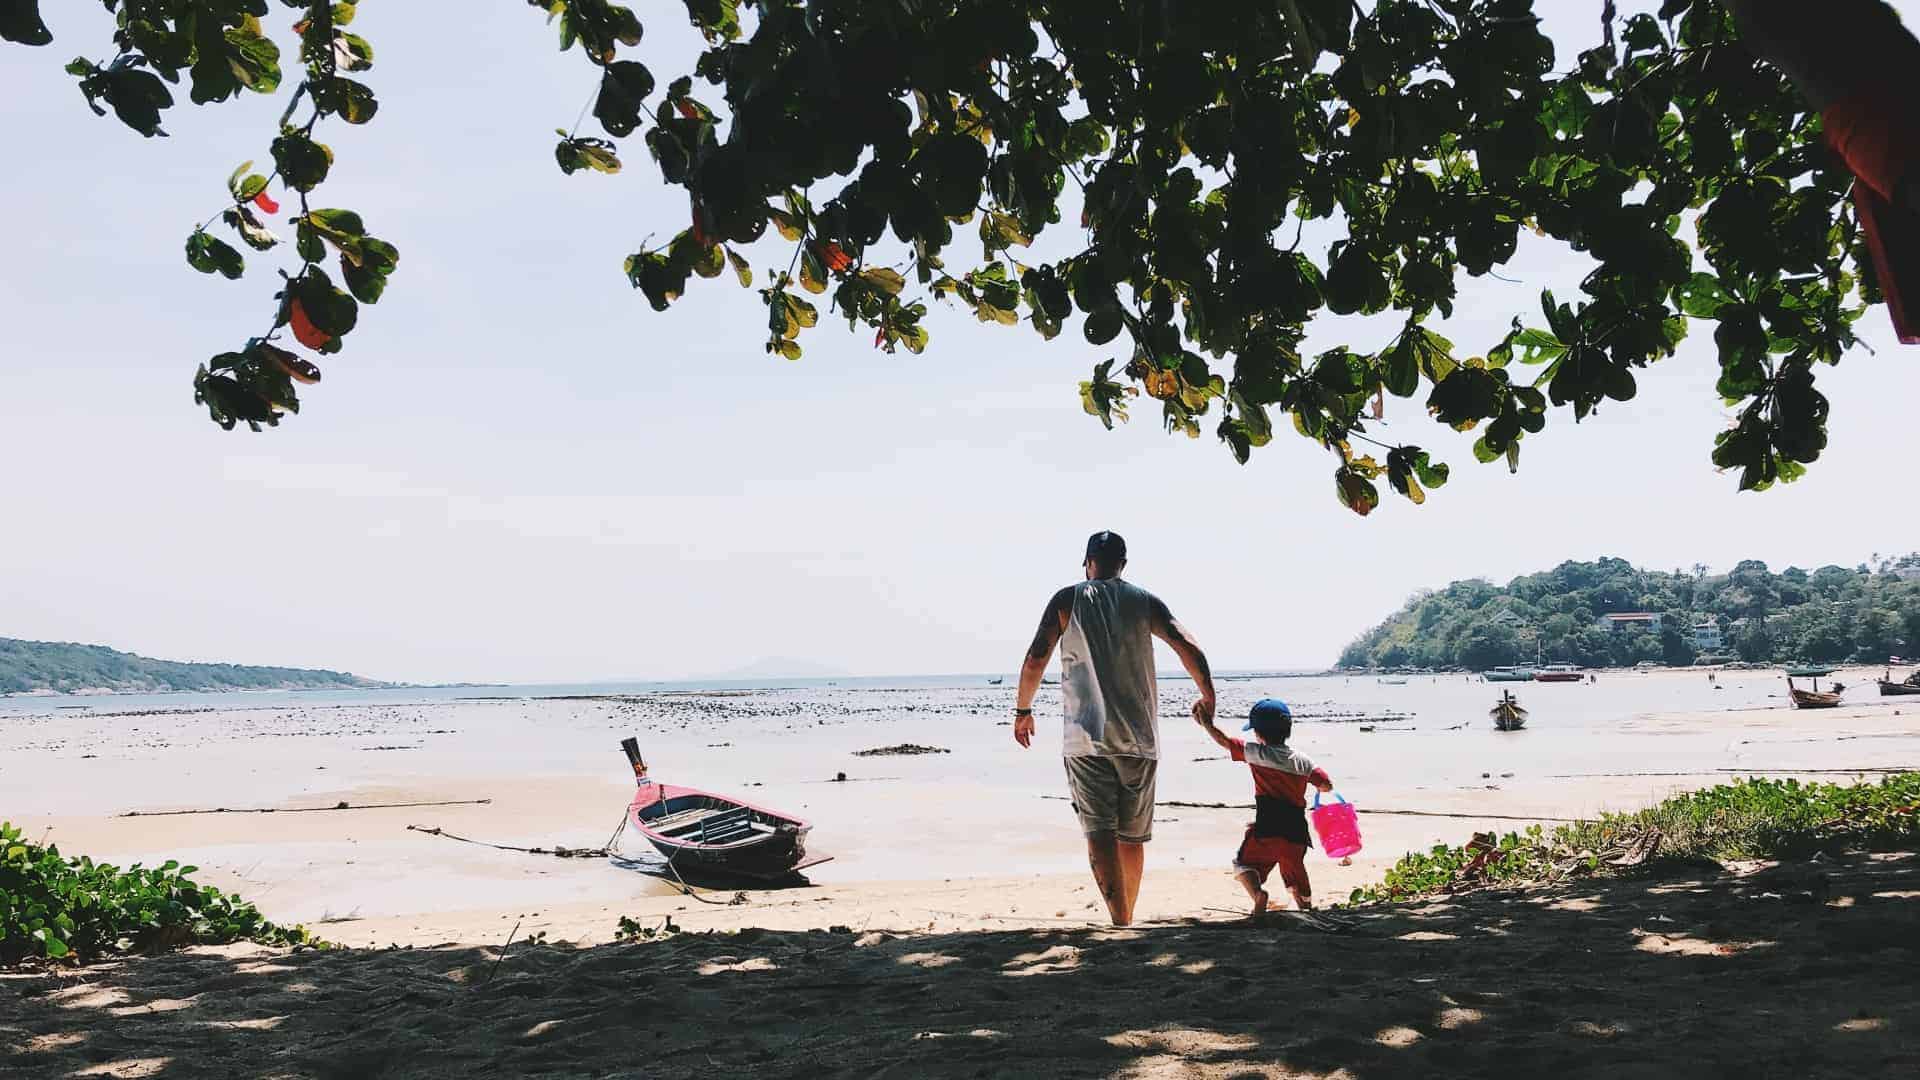 A serene beach scene with a man and a young child holding hands, walking towards the water's edge. The foreground shows a shaded area under the leafy canopy of a tree, while the background reveals a calm sea with a few boats anchored near the shore and hills in the distance. It is a bright, sunny day.